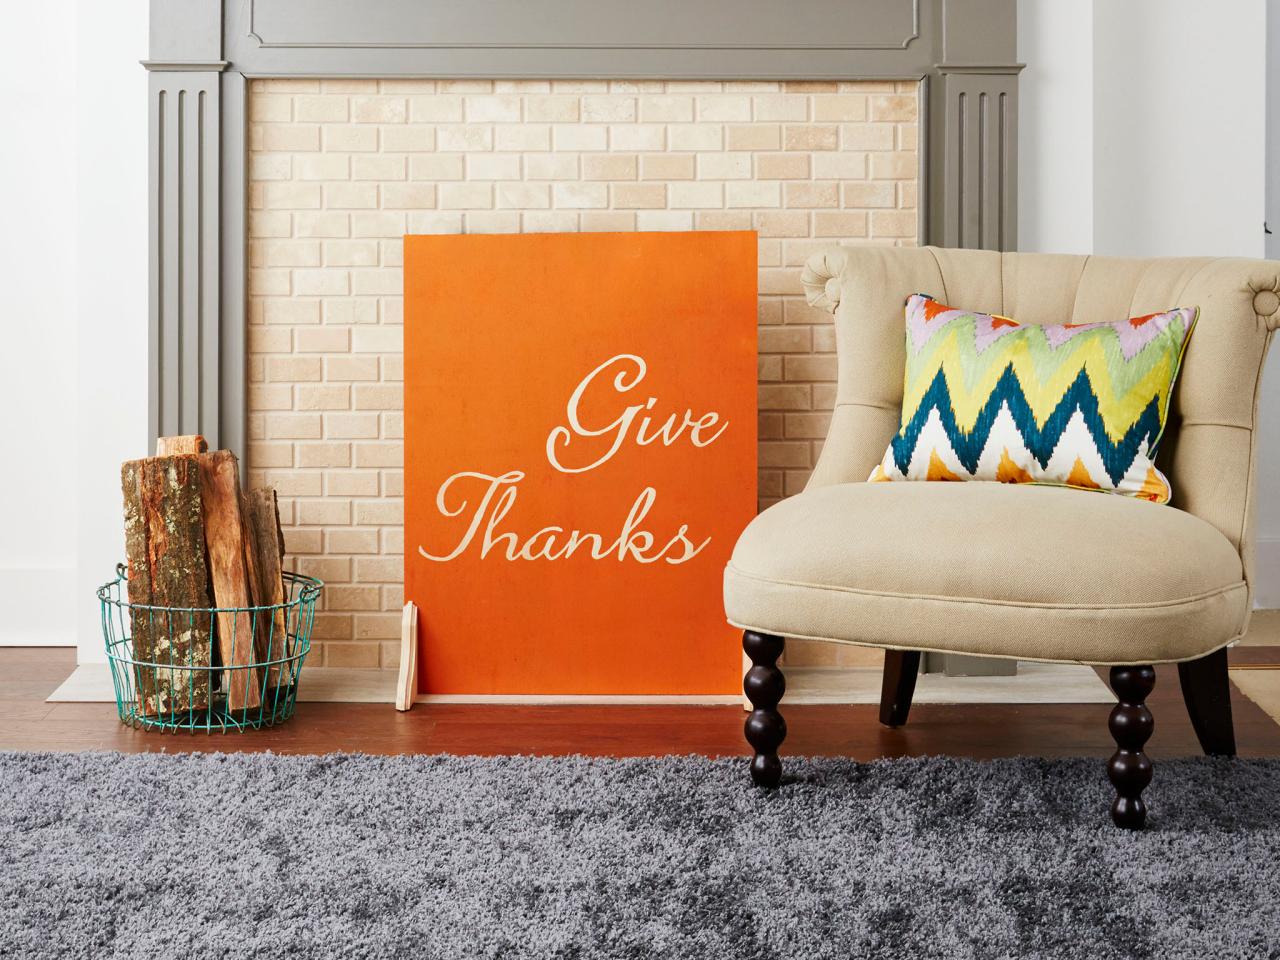 Follow these instructions from HGTV Magazine to customize a plywood fireplace screen with any message.